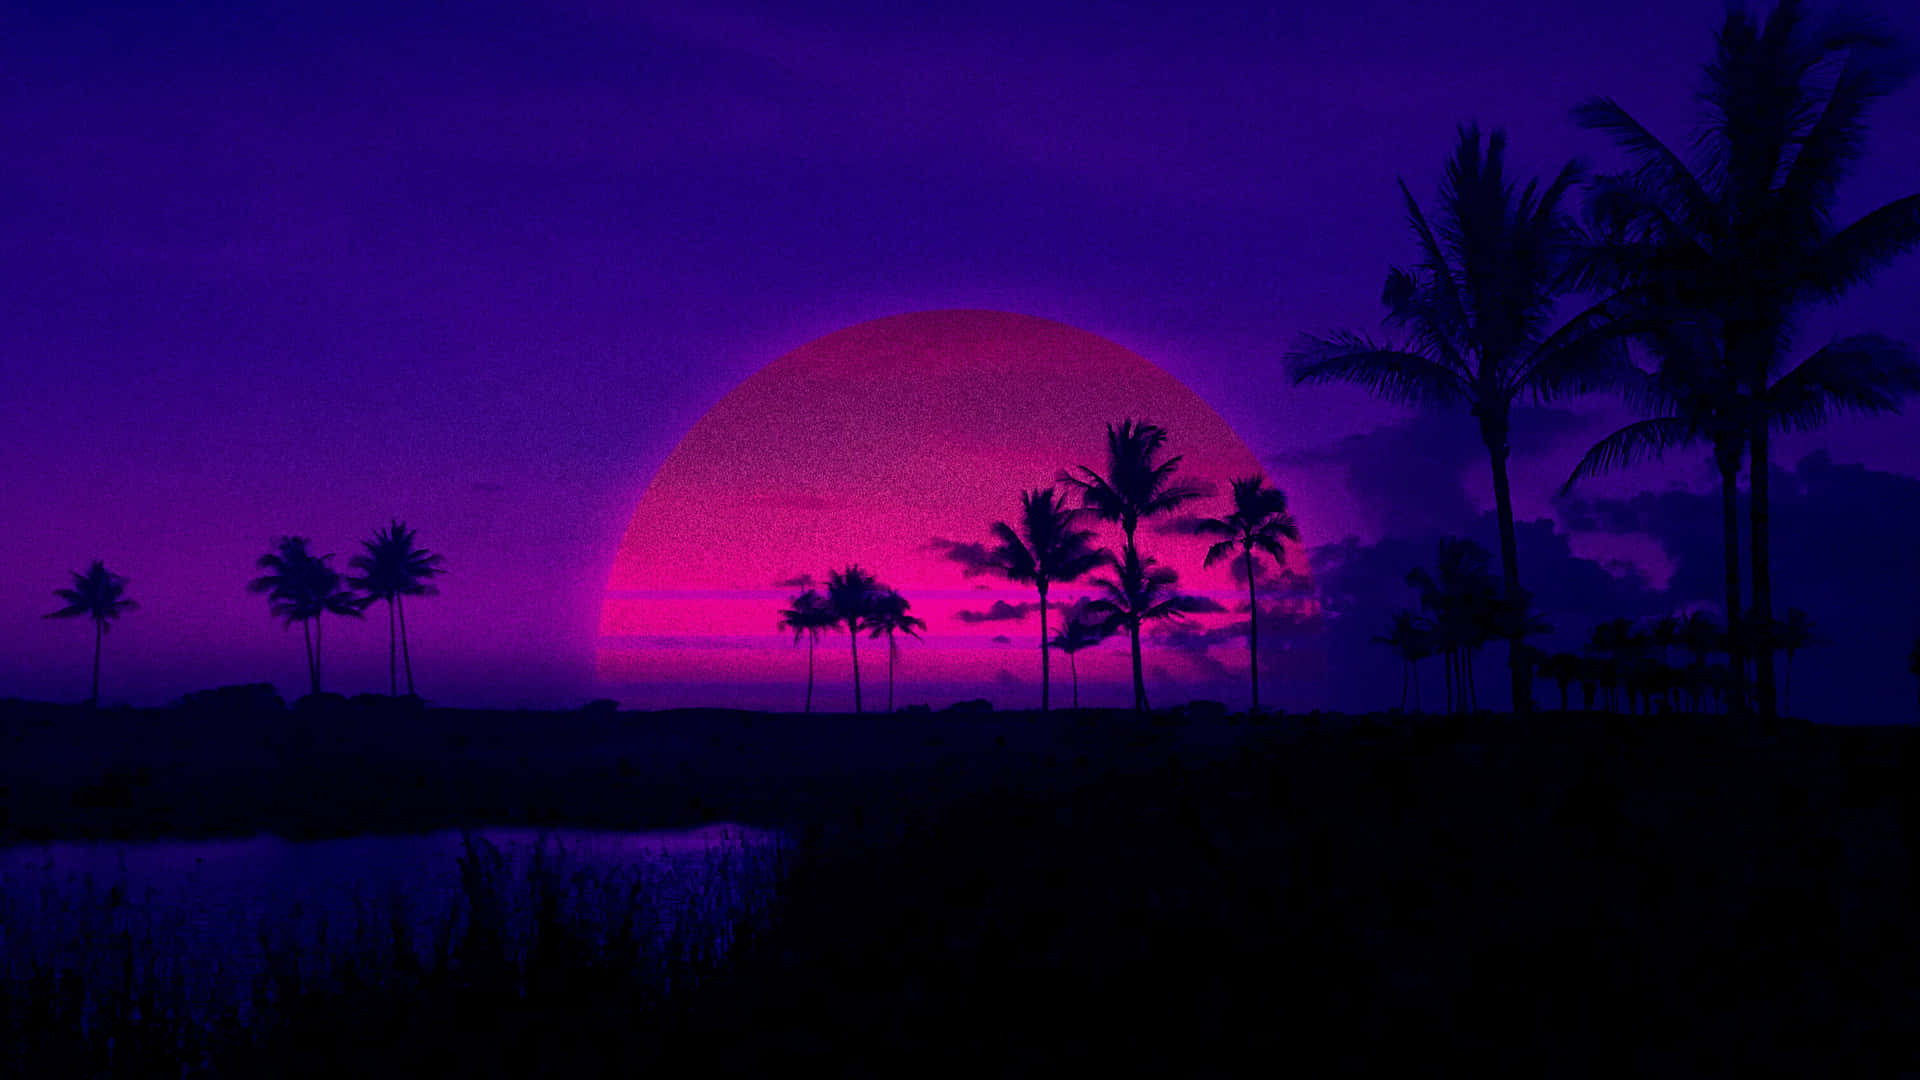 "Lost in a sea of dark purple, nothing but beauty in sight.”